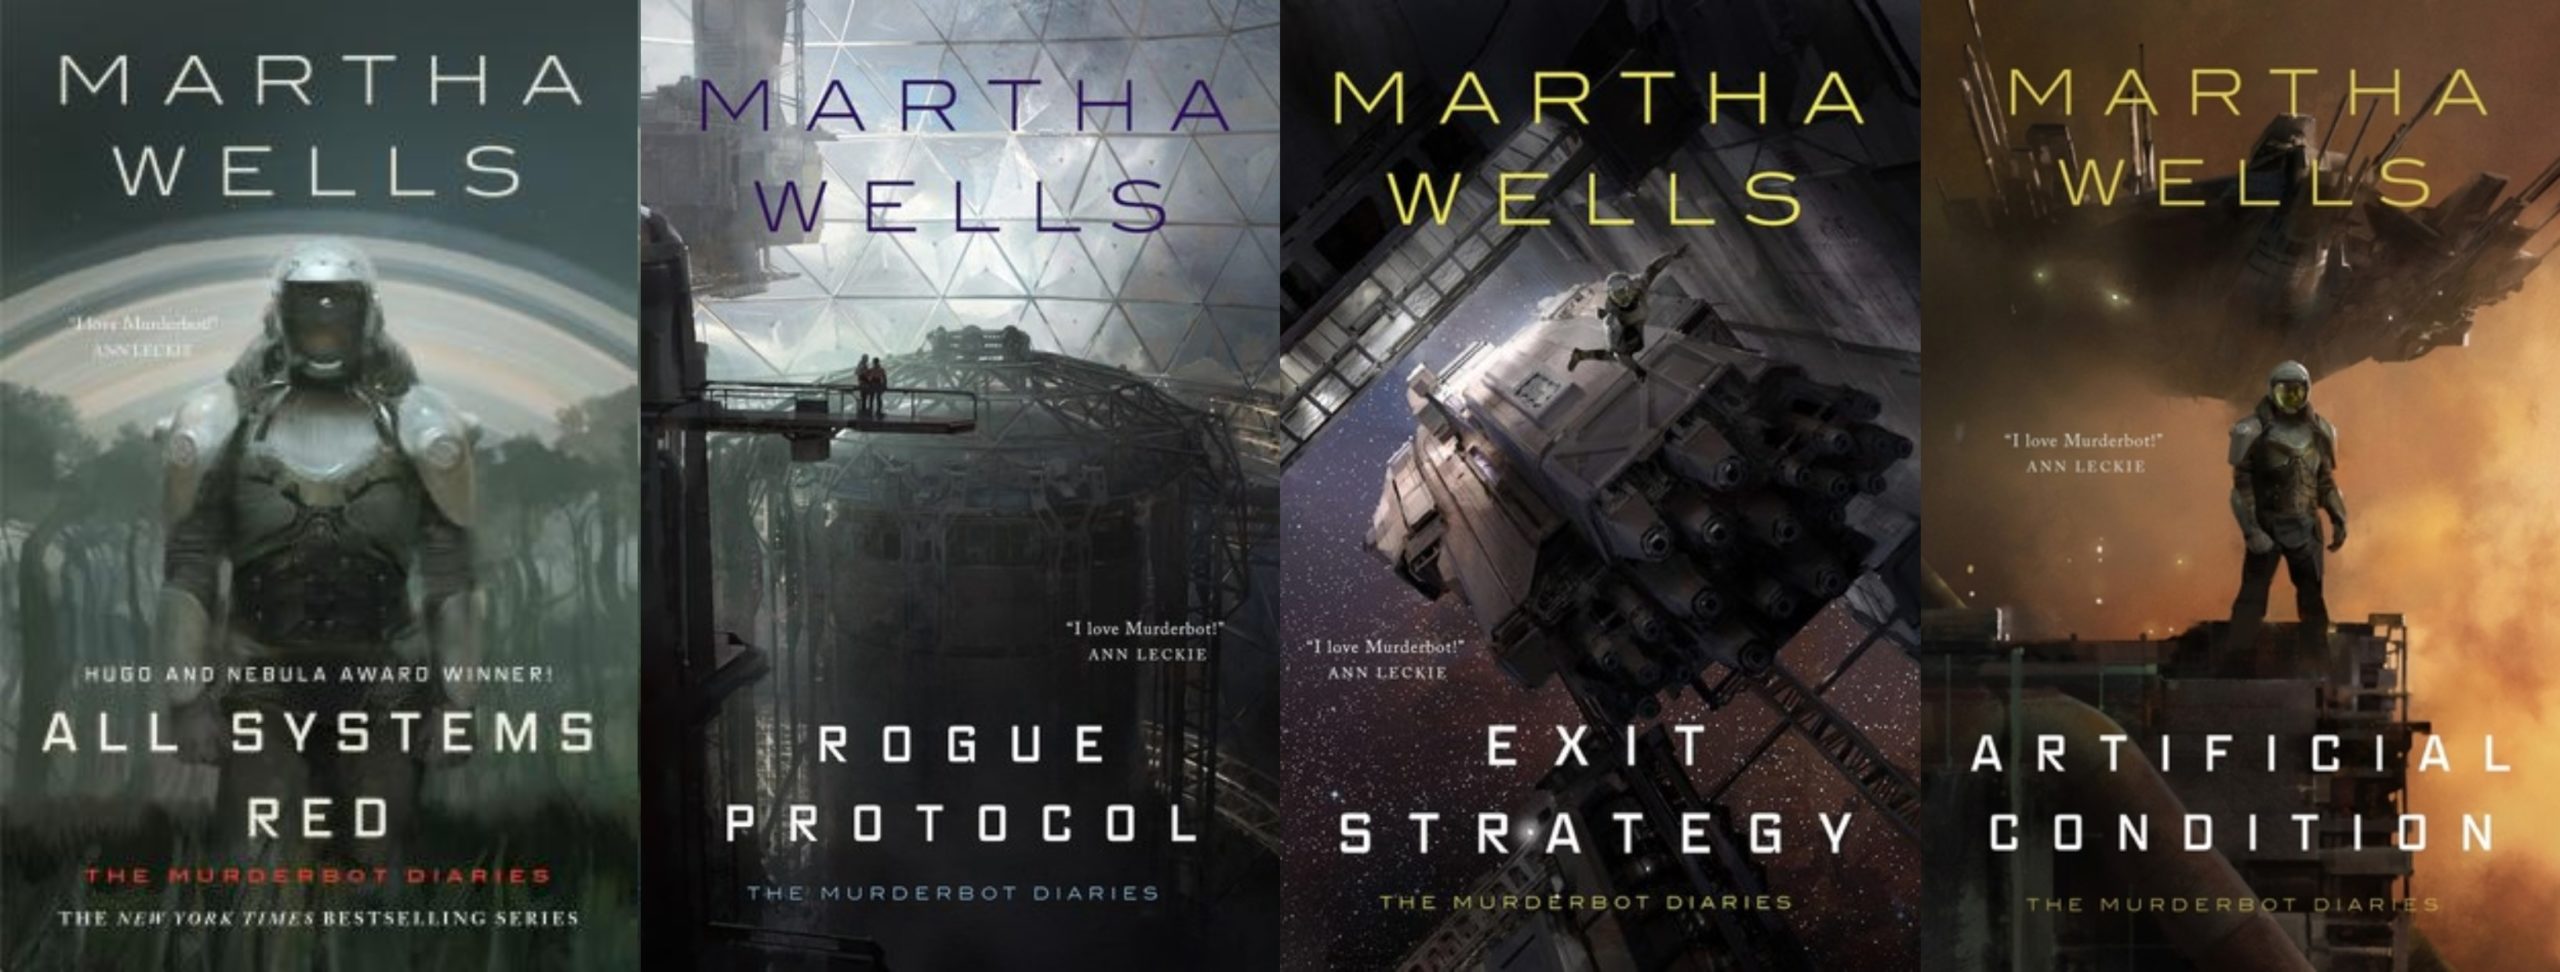 The Murderbot Diaries by Martha Wells Review